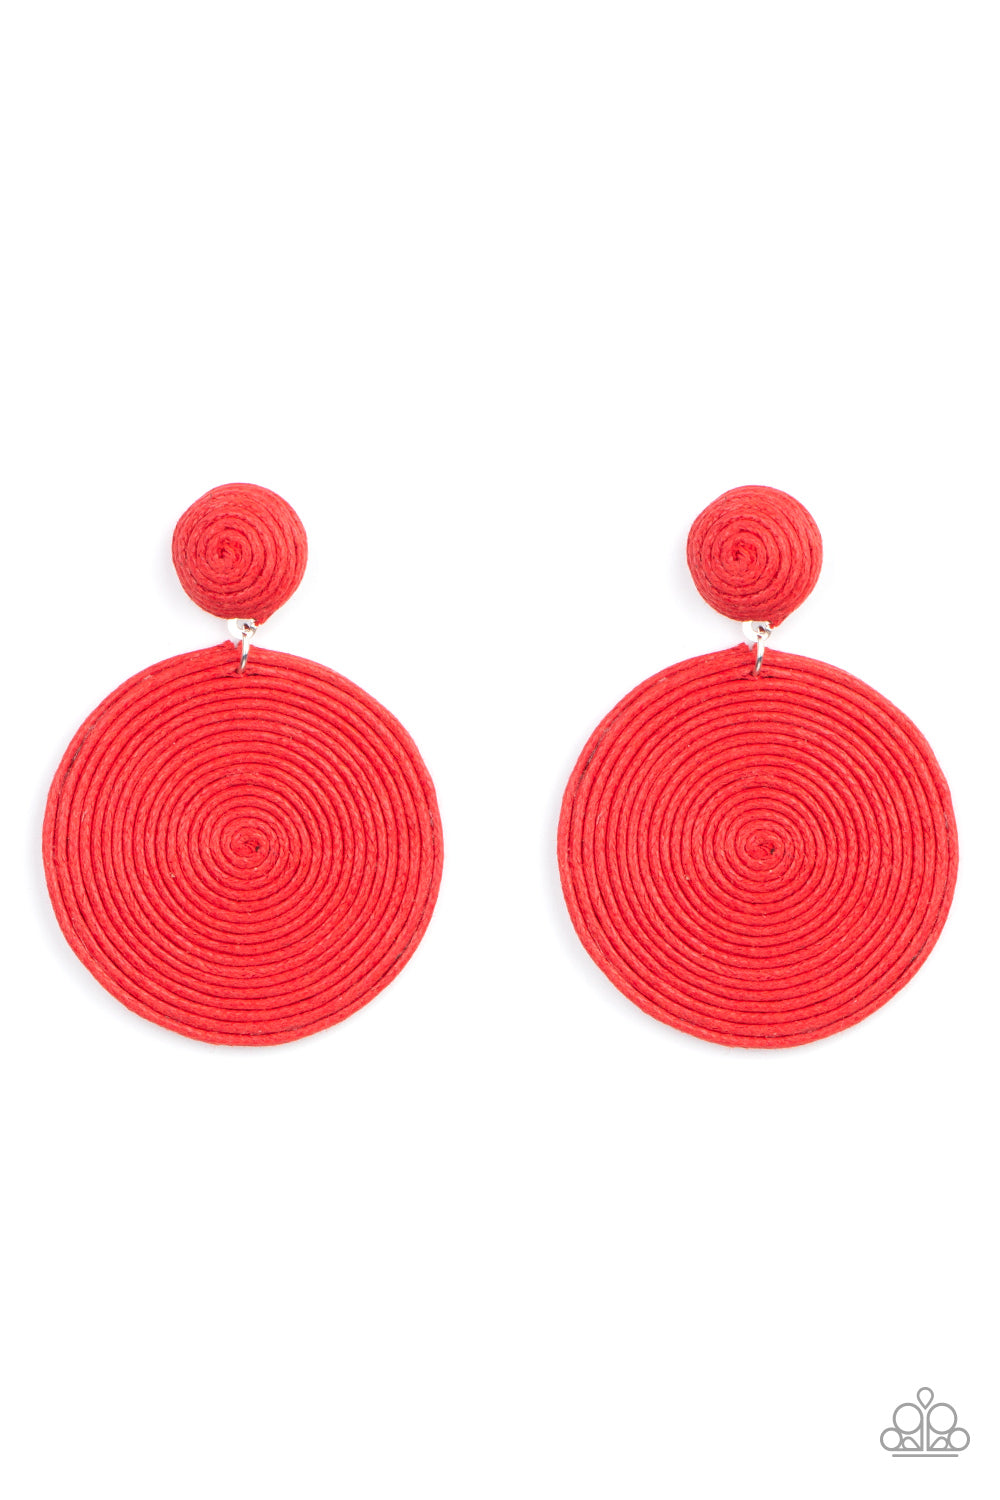 Circulate the Room - Red Thread Button Post Earrings a generous disc of red thread spirals around and around for a dizzying finish as it connects to a red button post. Earring attaches to a standard post fitting.  Sold as one pair of post earrings.  Paparazzi Jewelry is lead and nickel free so it's perfect for sensitive skin too!